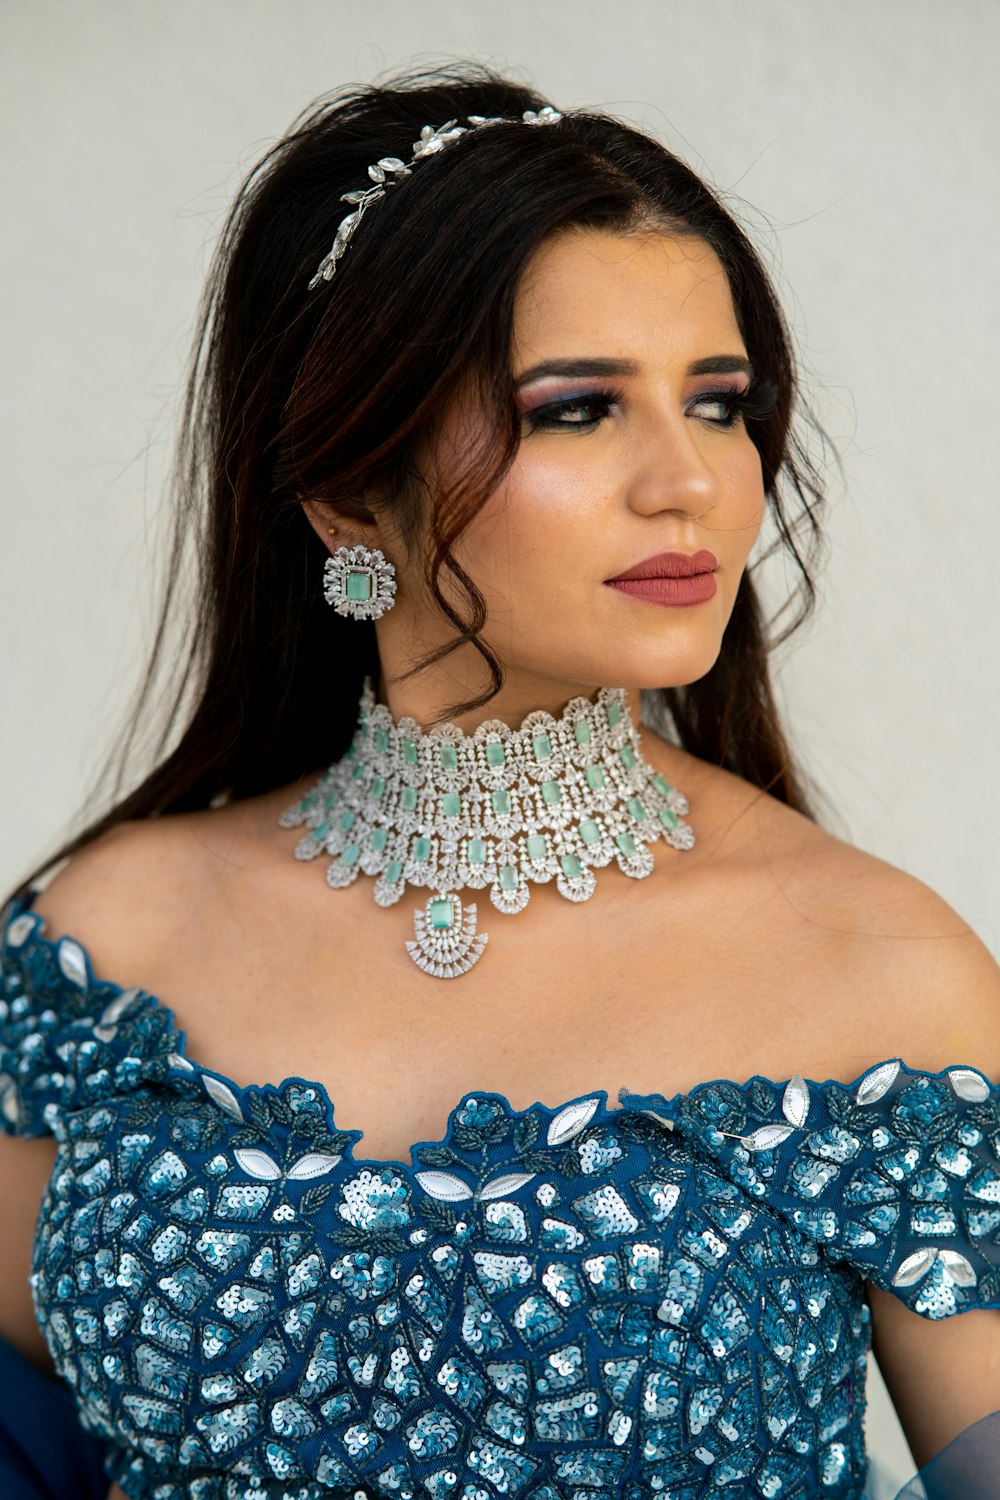 a woman in a blue dress with a necklace and earrings